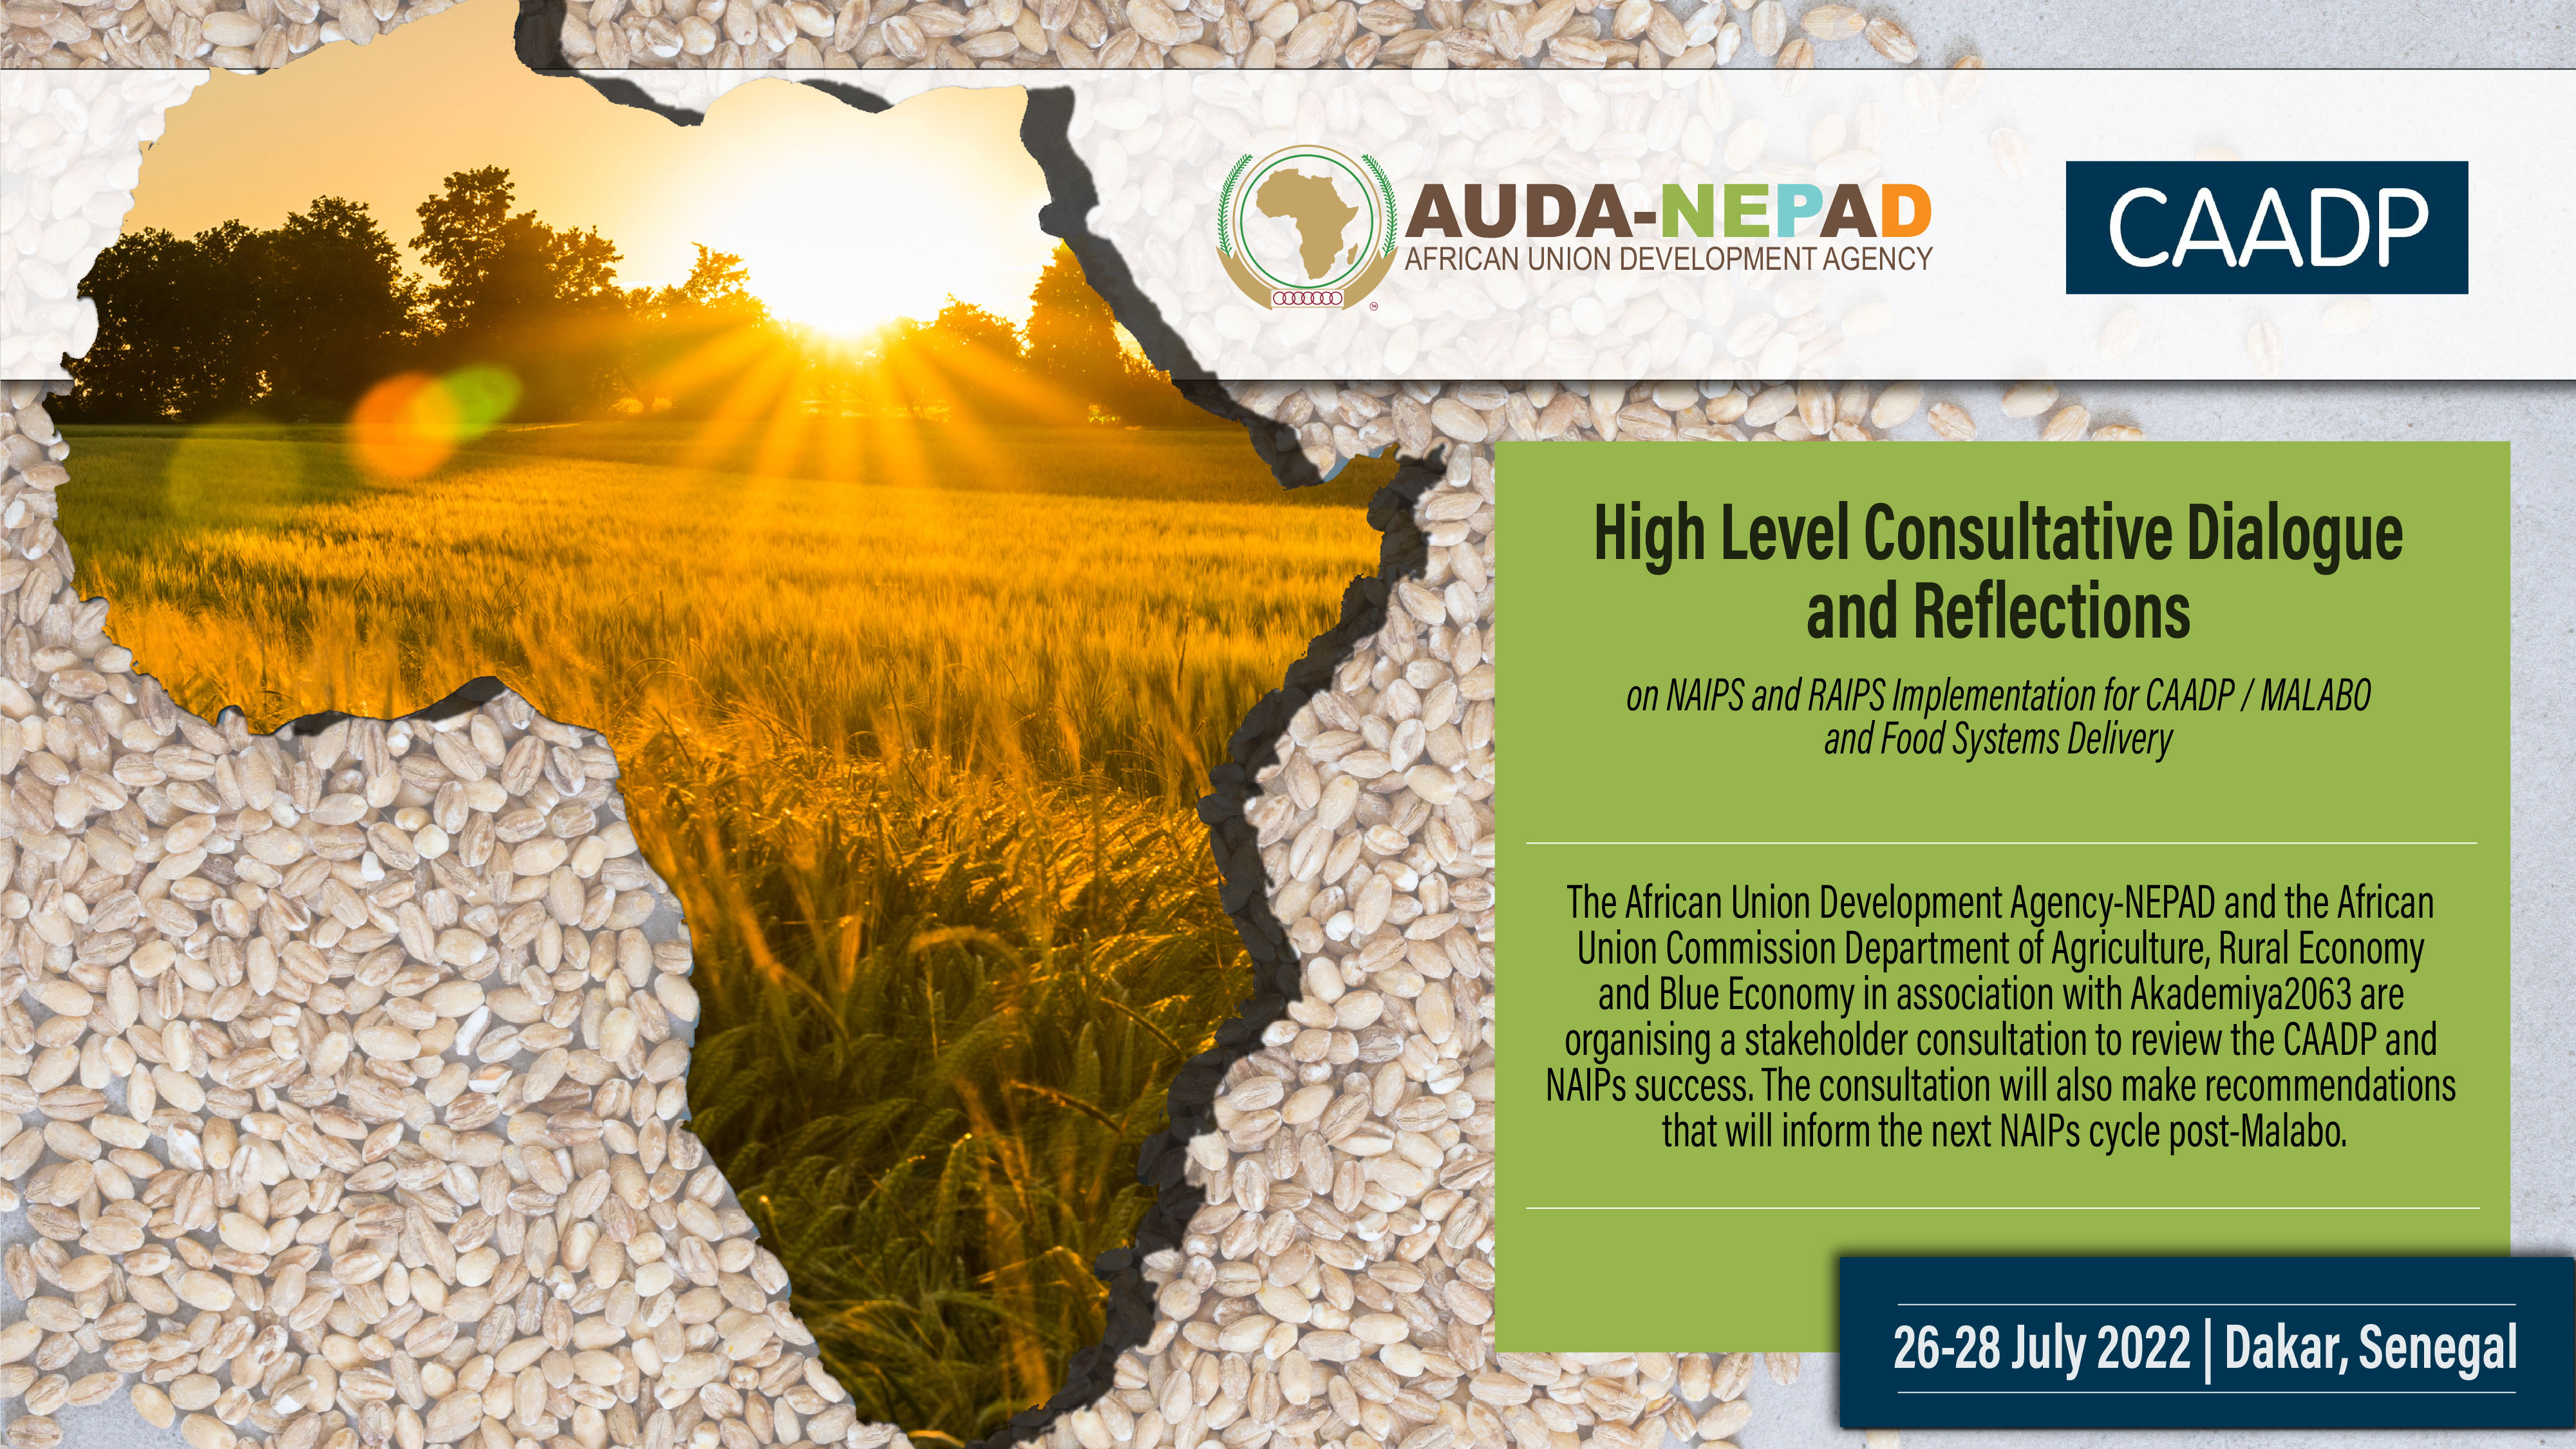 CAADP Key Messages 6